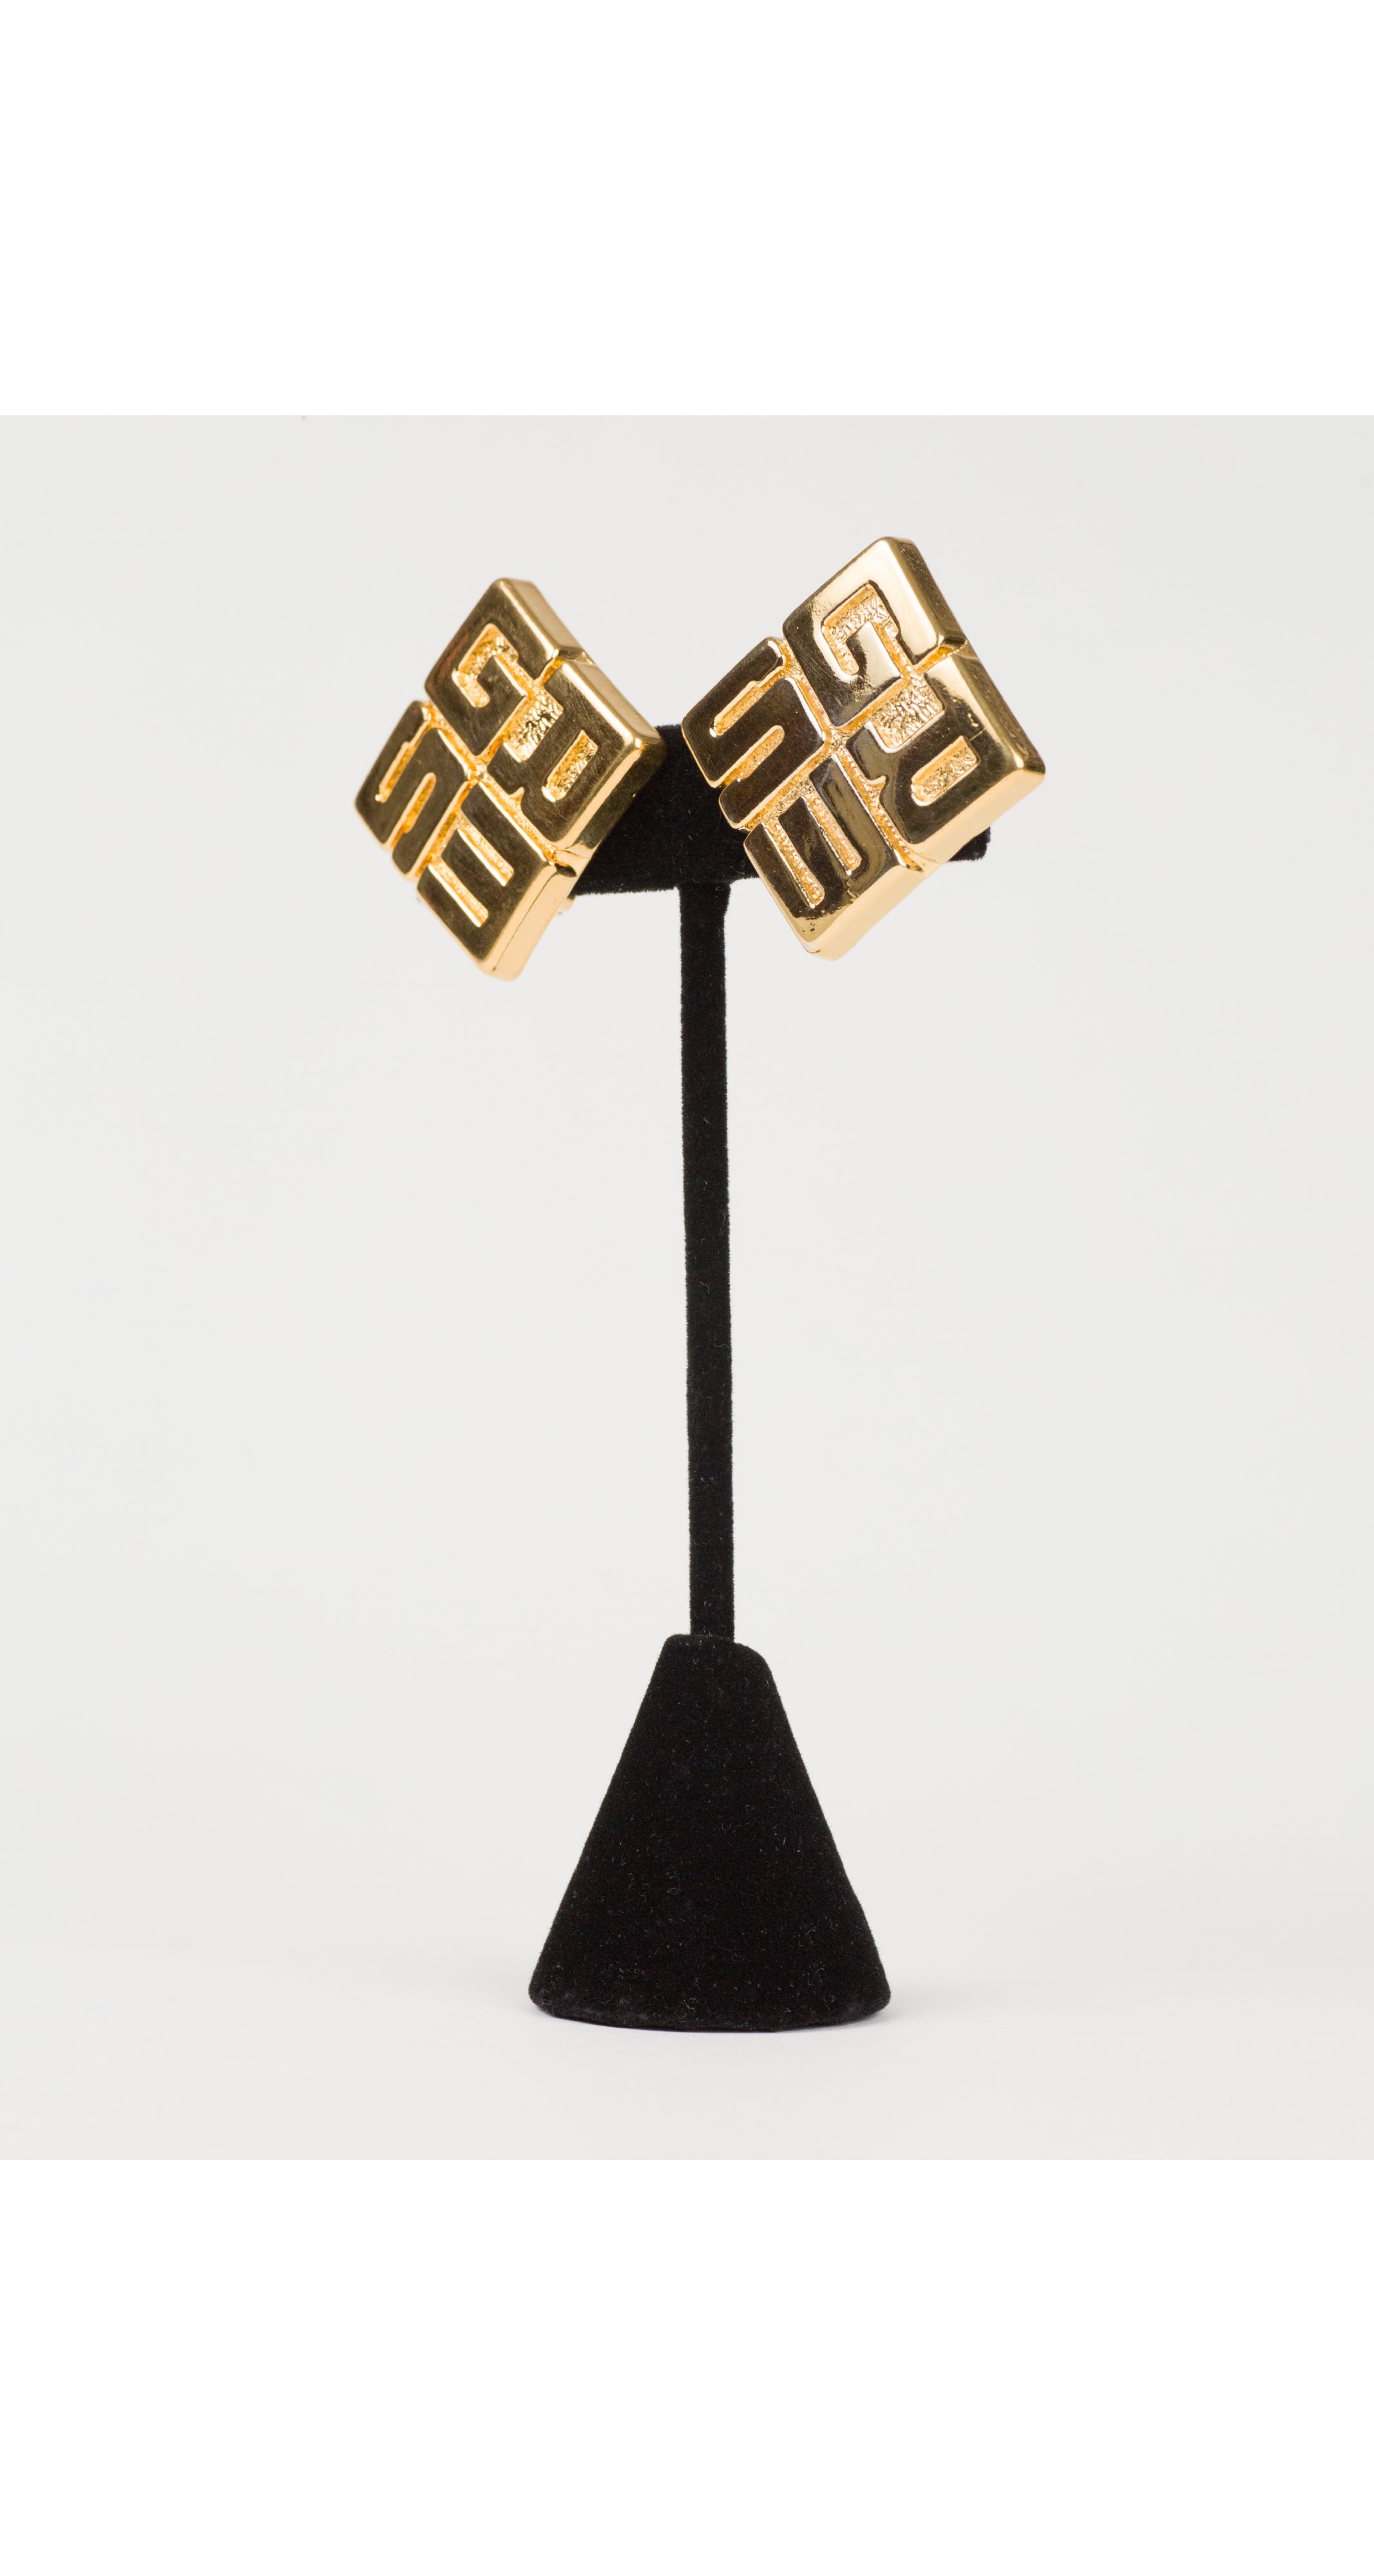 1980s Logo Gold-Tone Square Clip-On Earrings